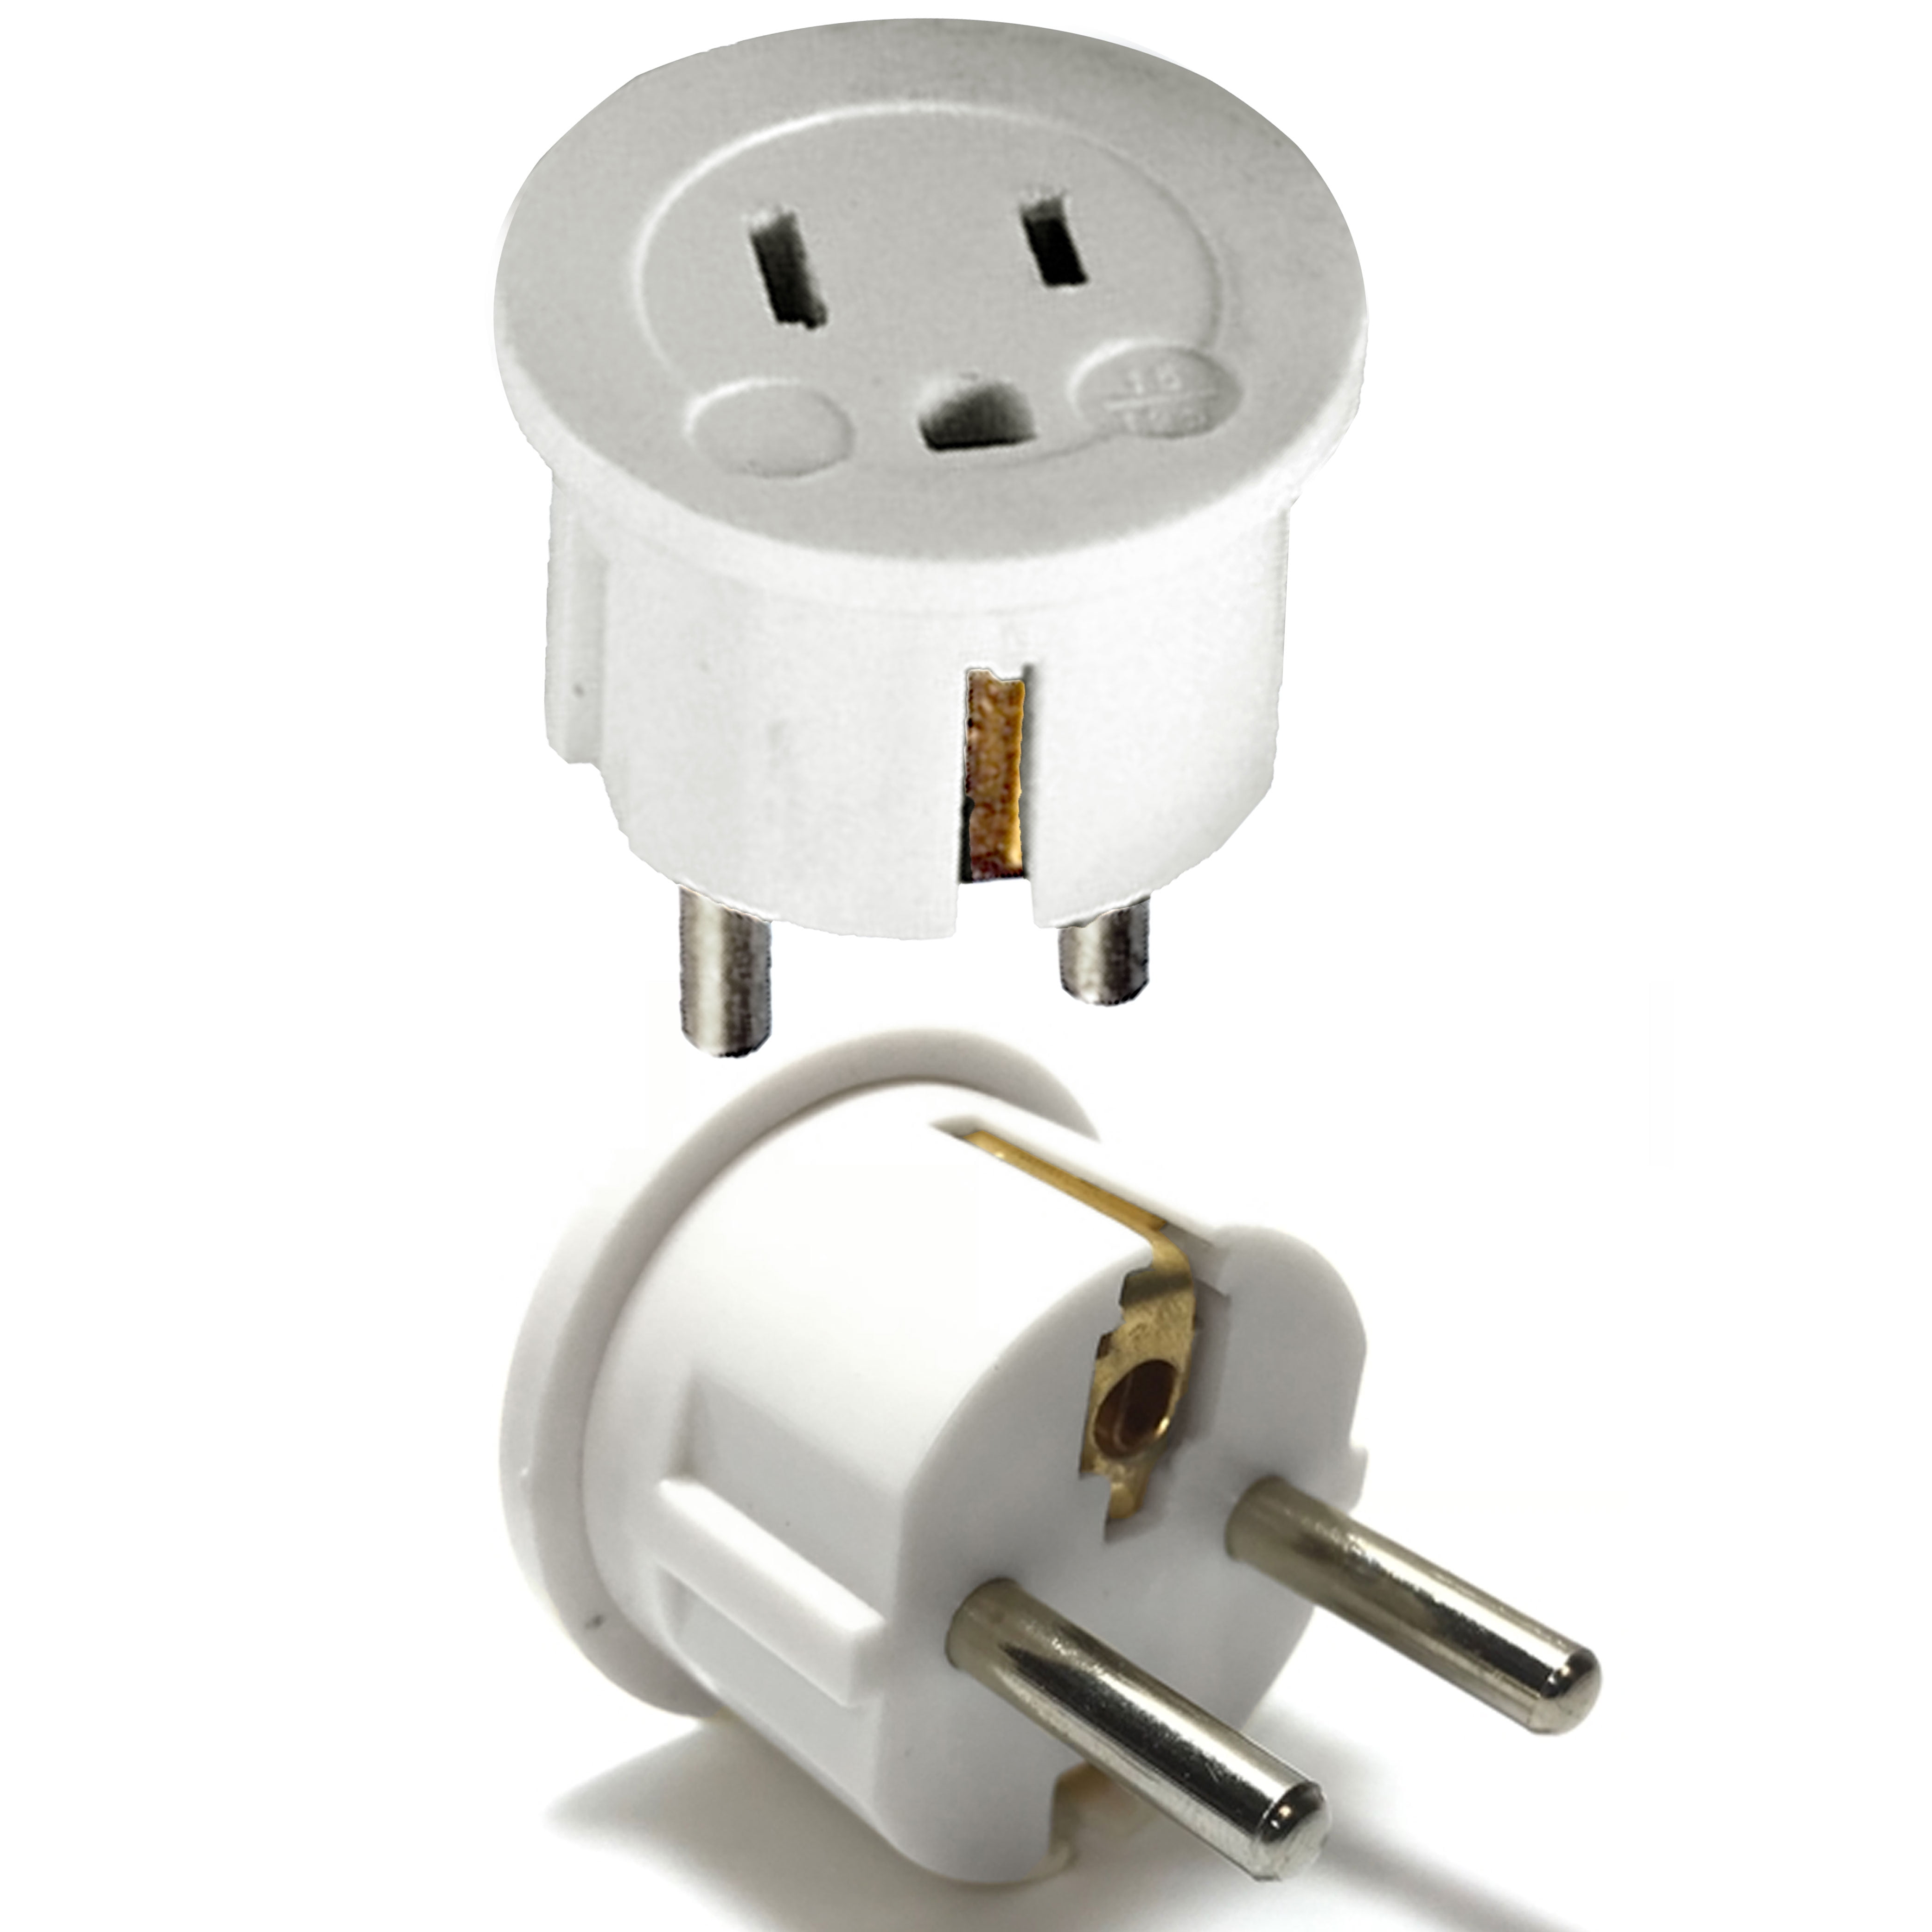 American US to European EU Travel Adapter Power Jack Wall Plug Outlet Converter 